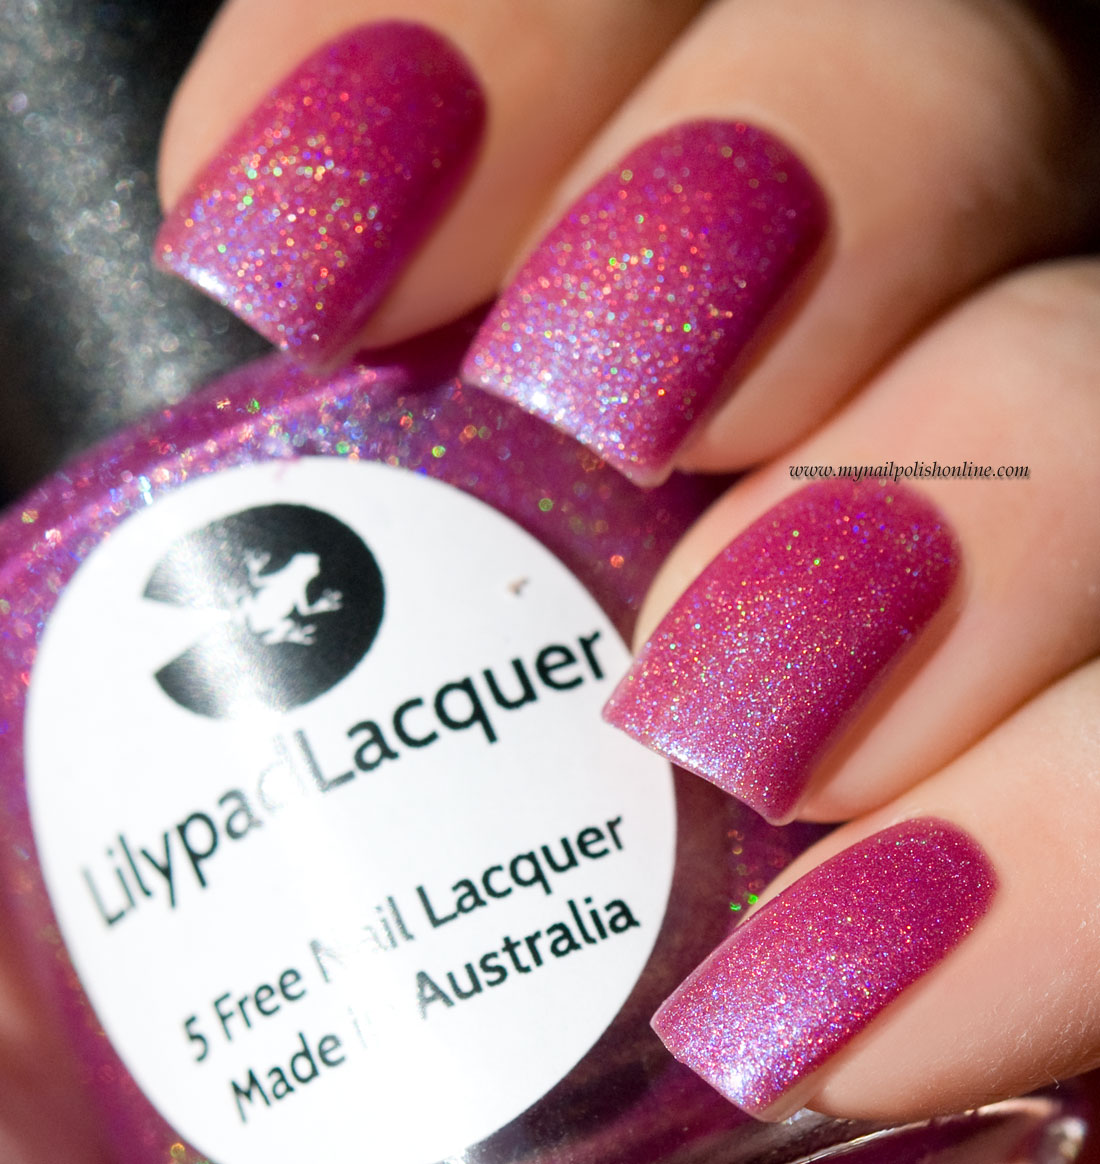 LilypadLacquer - Blooming Violets